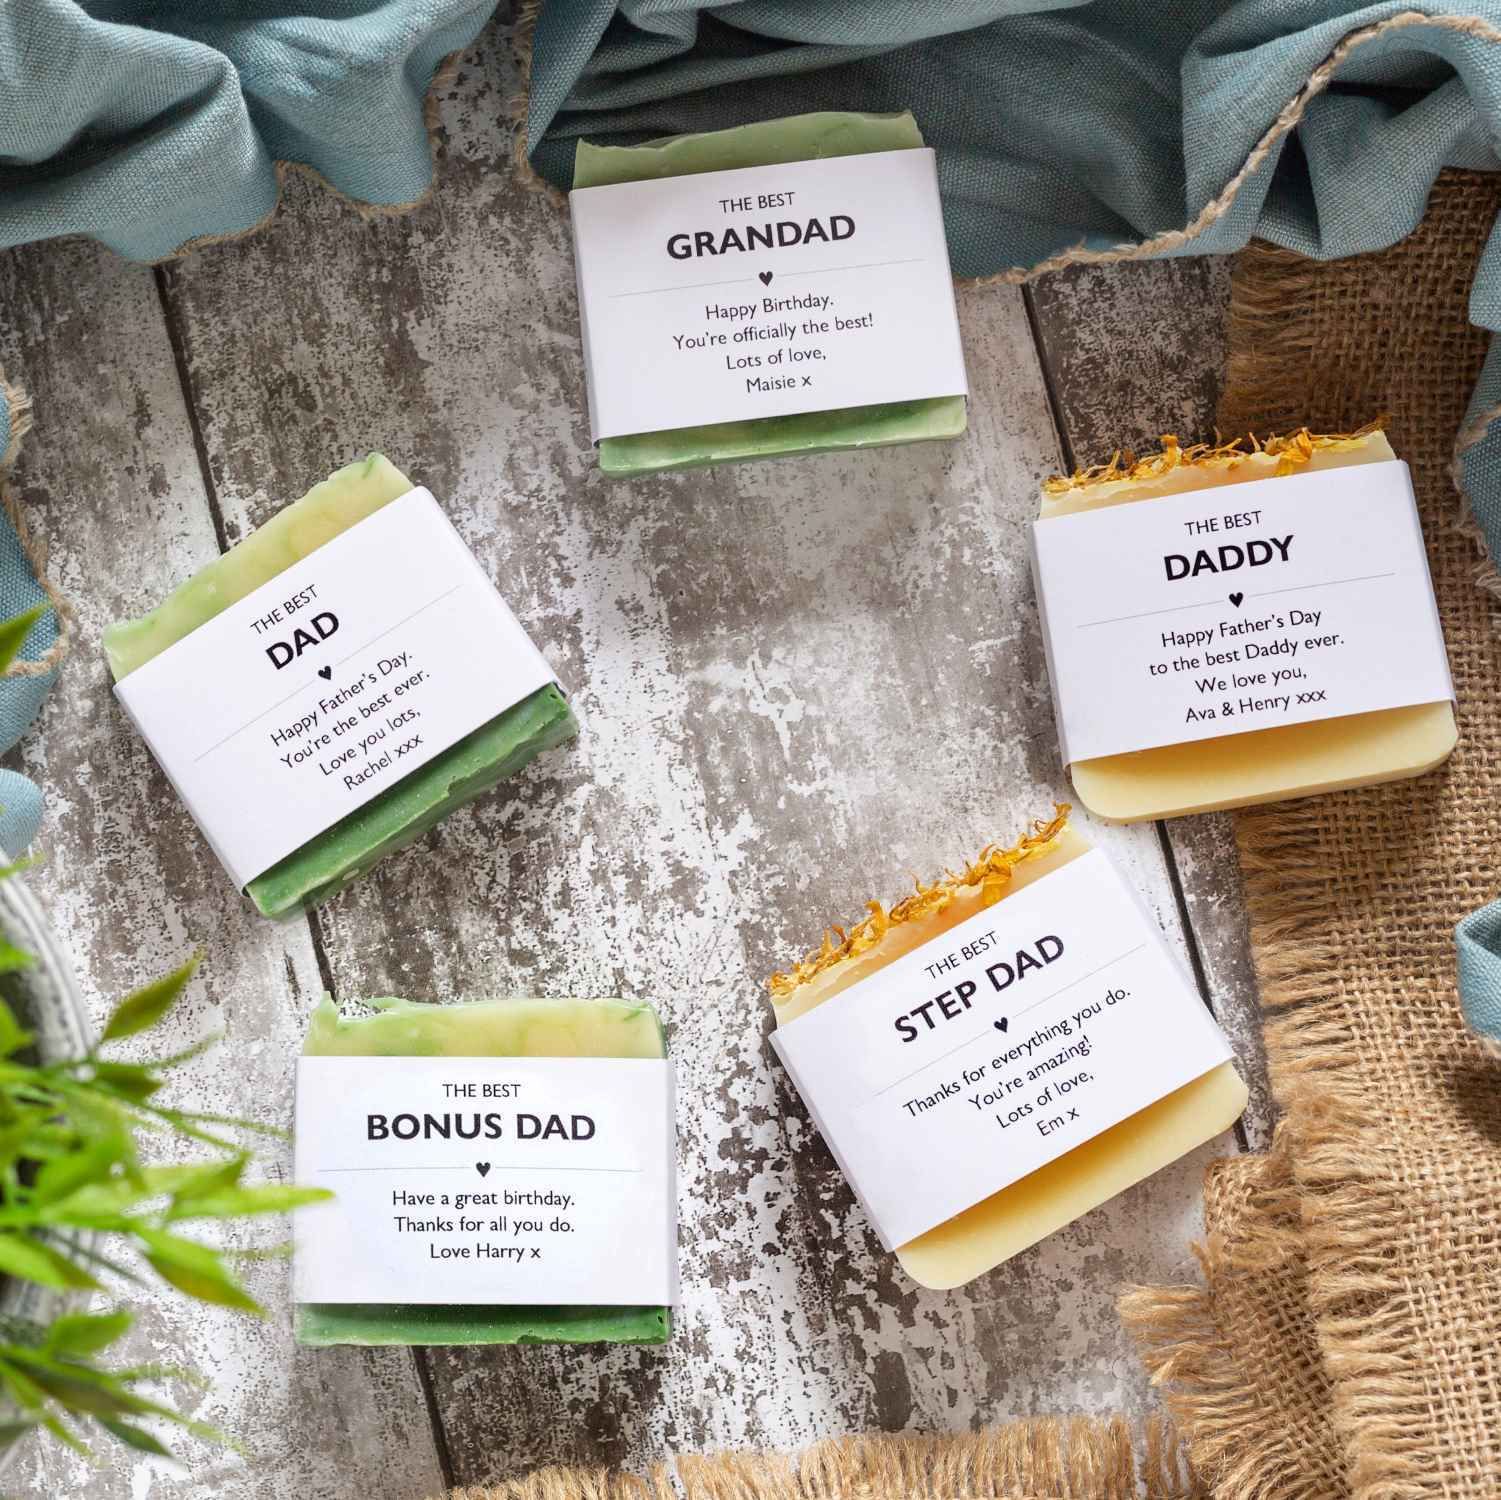 Mothers Day gift ideas personalised pamper sets Lovely Soap Co